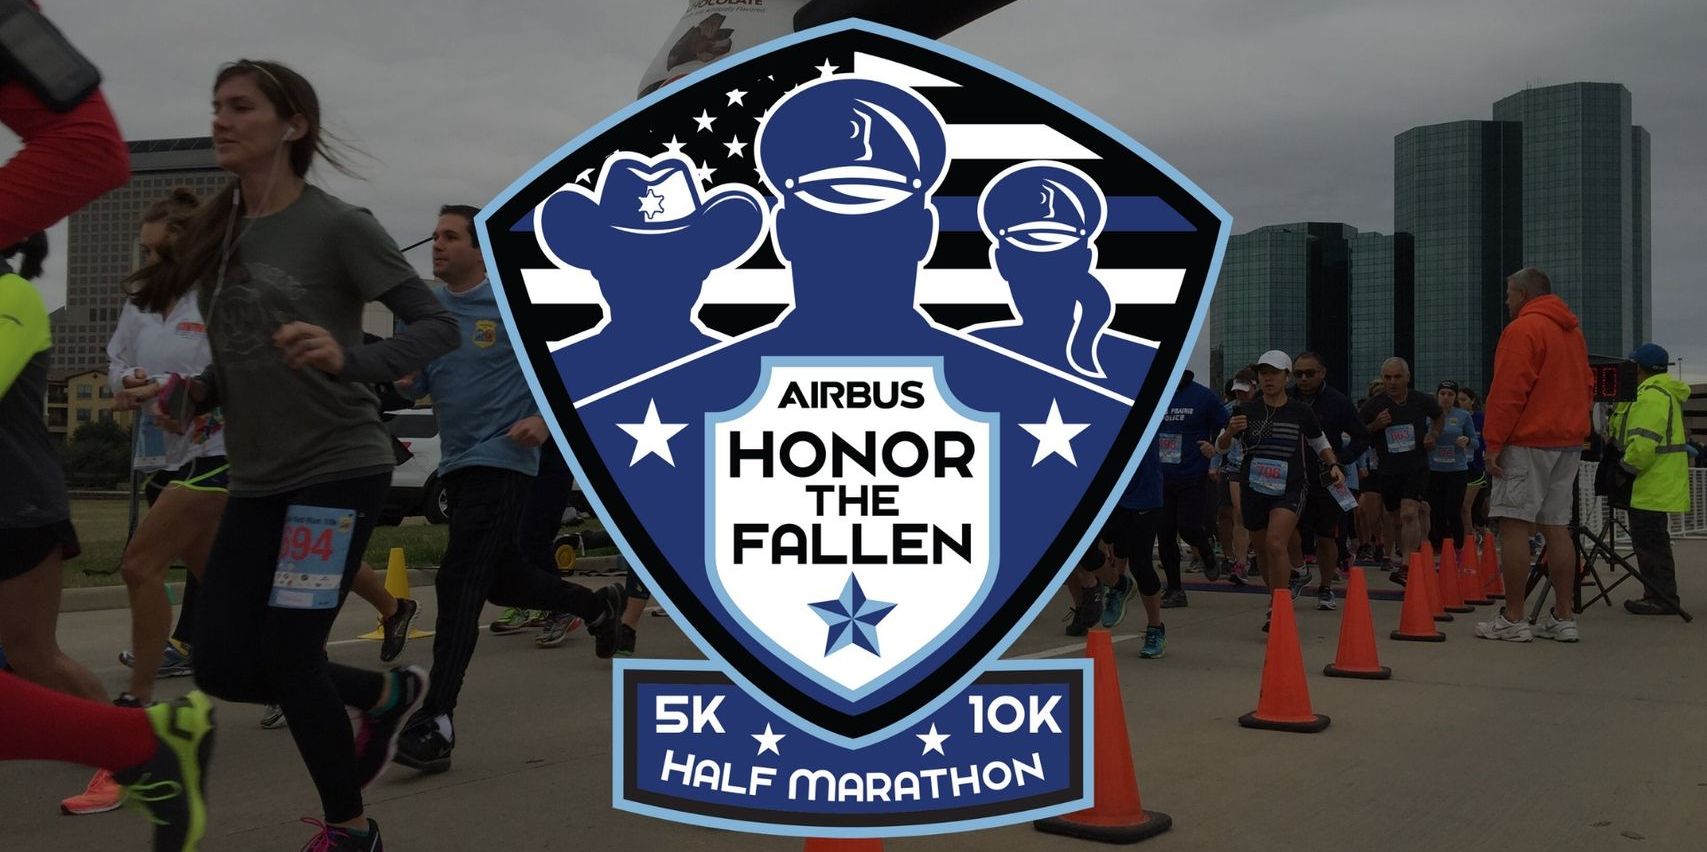 Honor the Fallen 5K, 10K, and Half promotional image